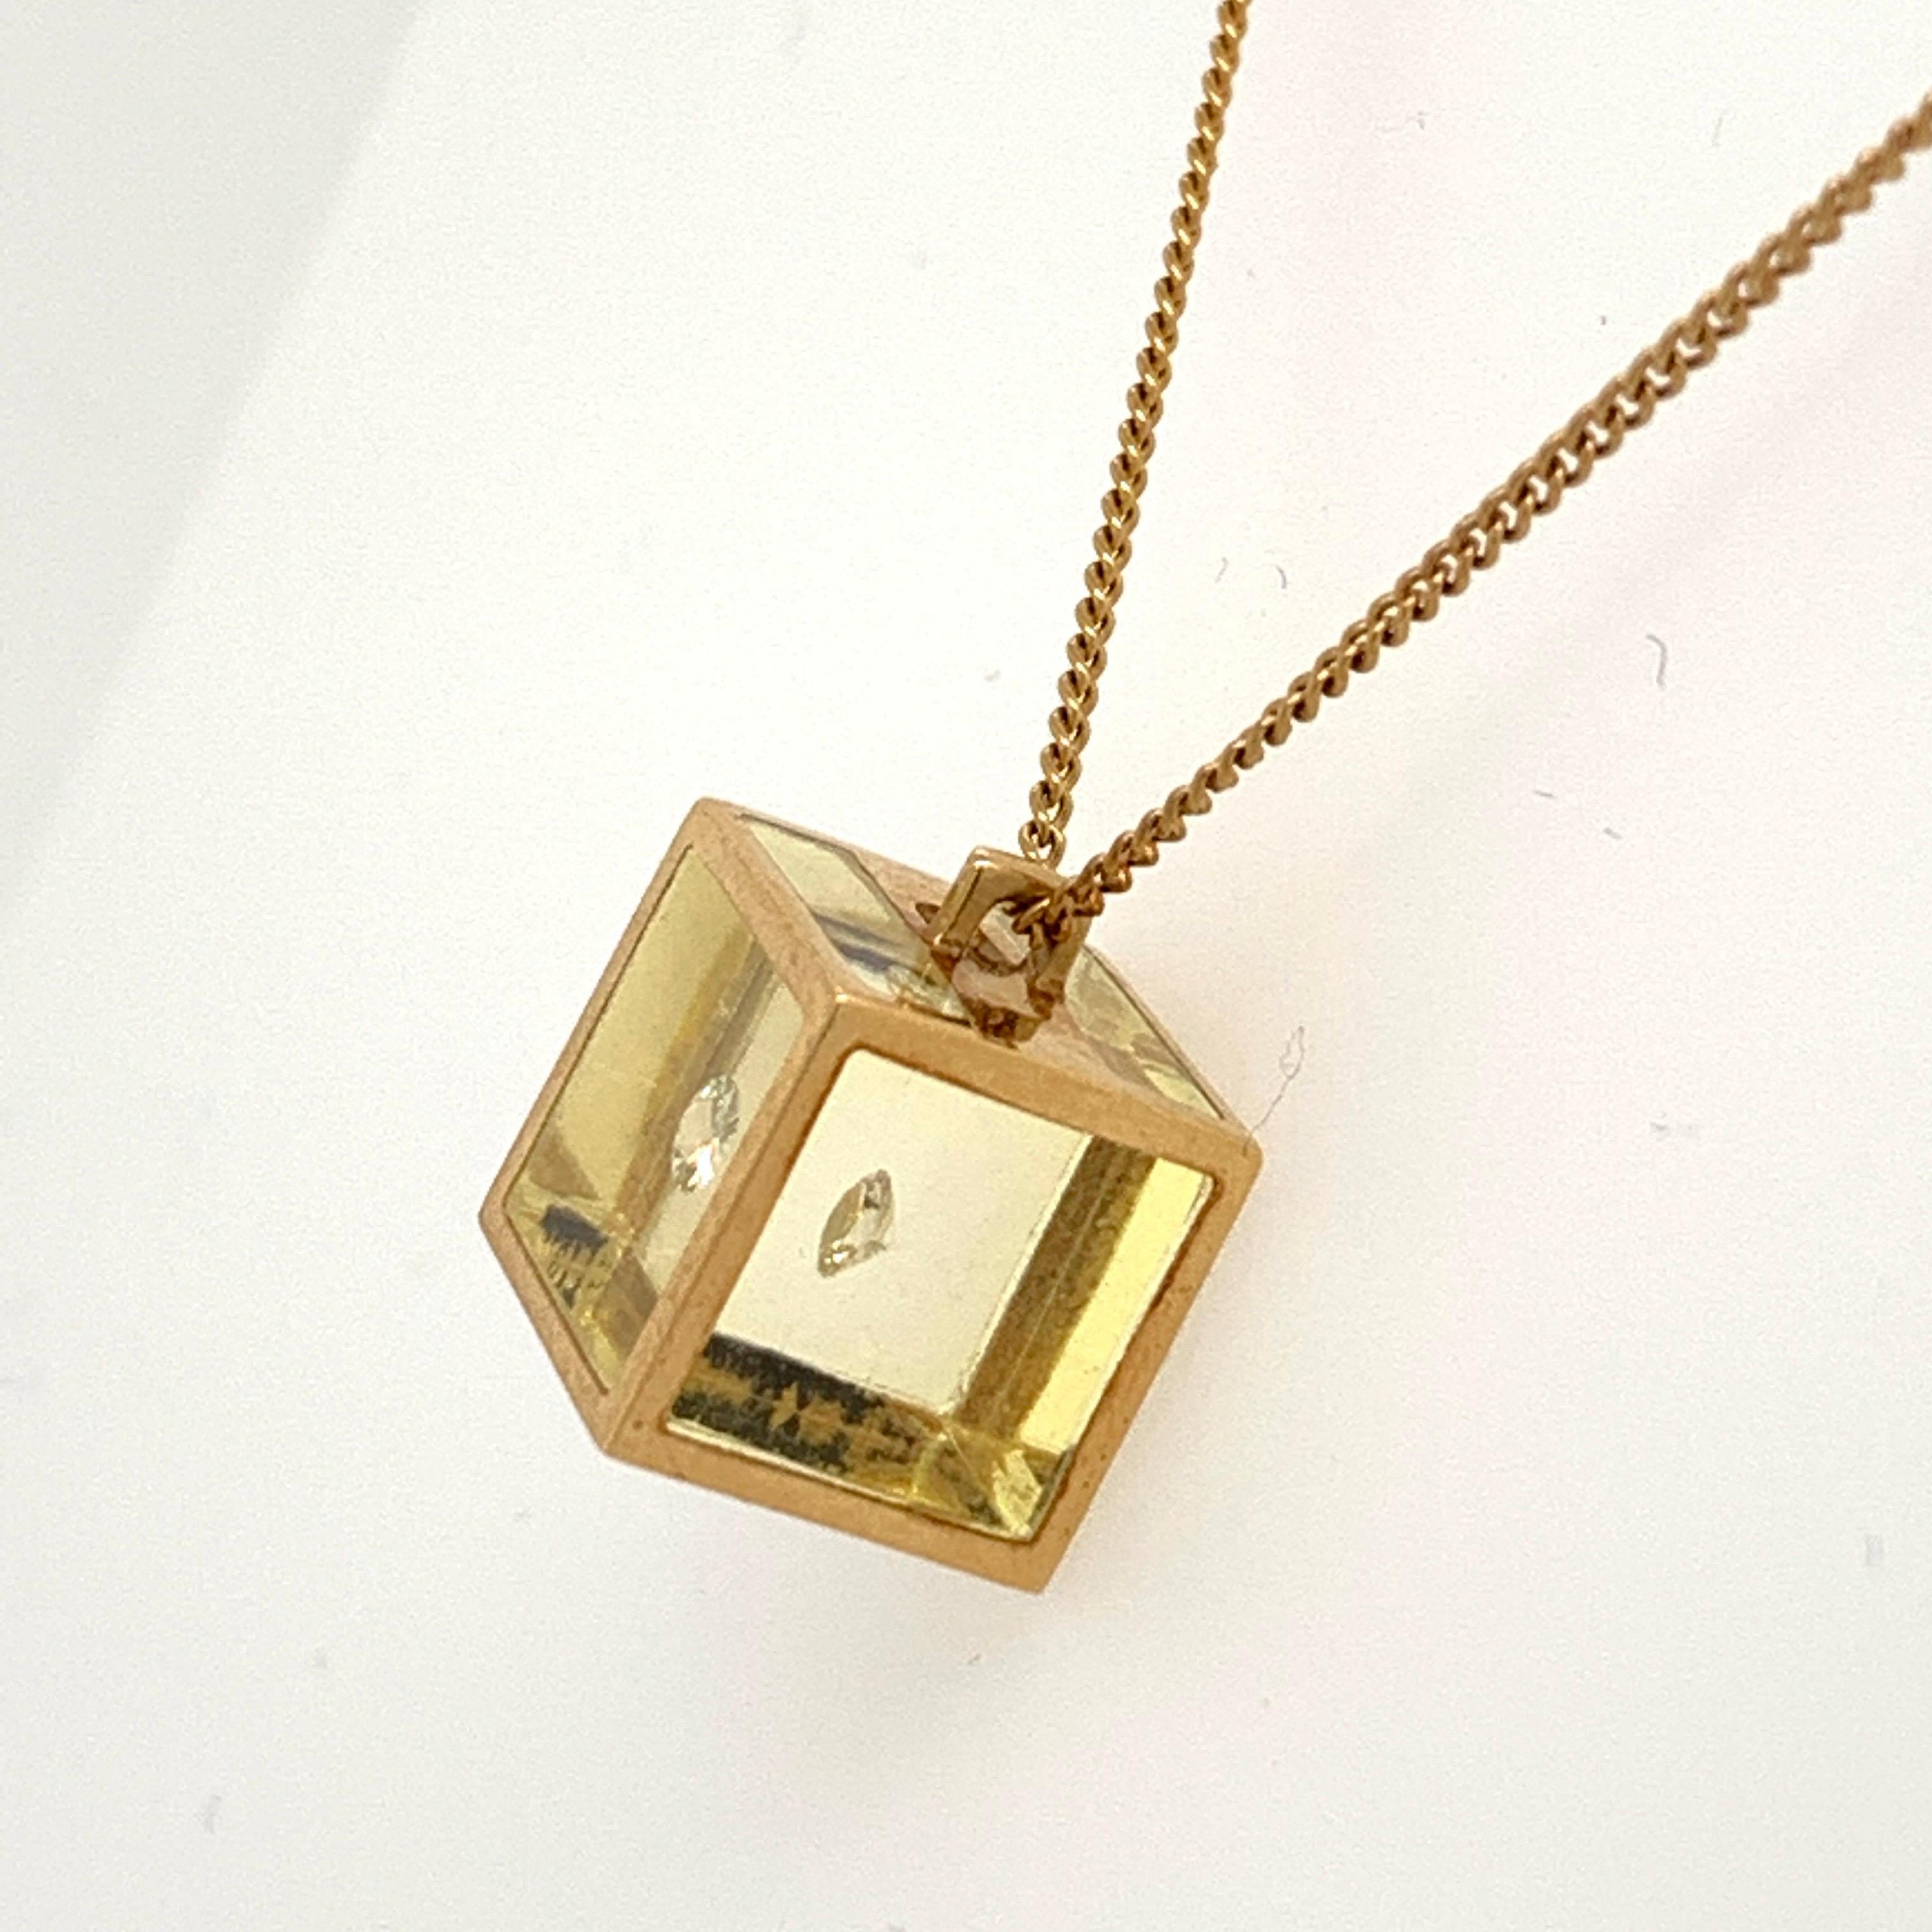 Original Pascal Morabito Cube and Diamond 18k Yellow Gold Pendant.

The chain is just over 15 1/2 inch and weighs 3.78 grams. The pendant is filled with resin and measures 9.3mm.  